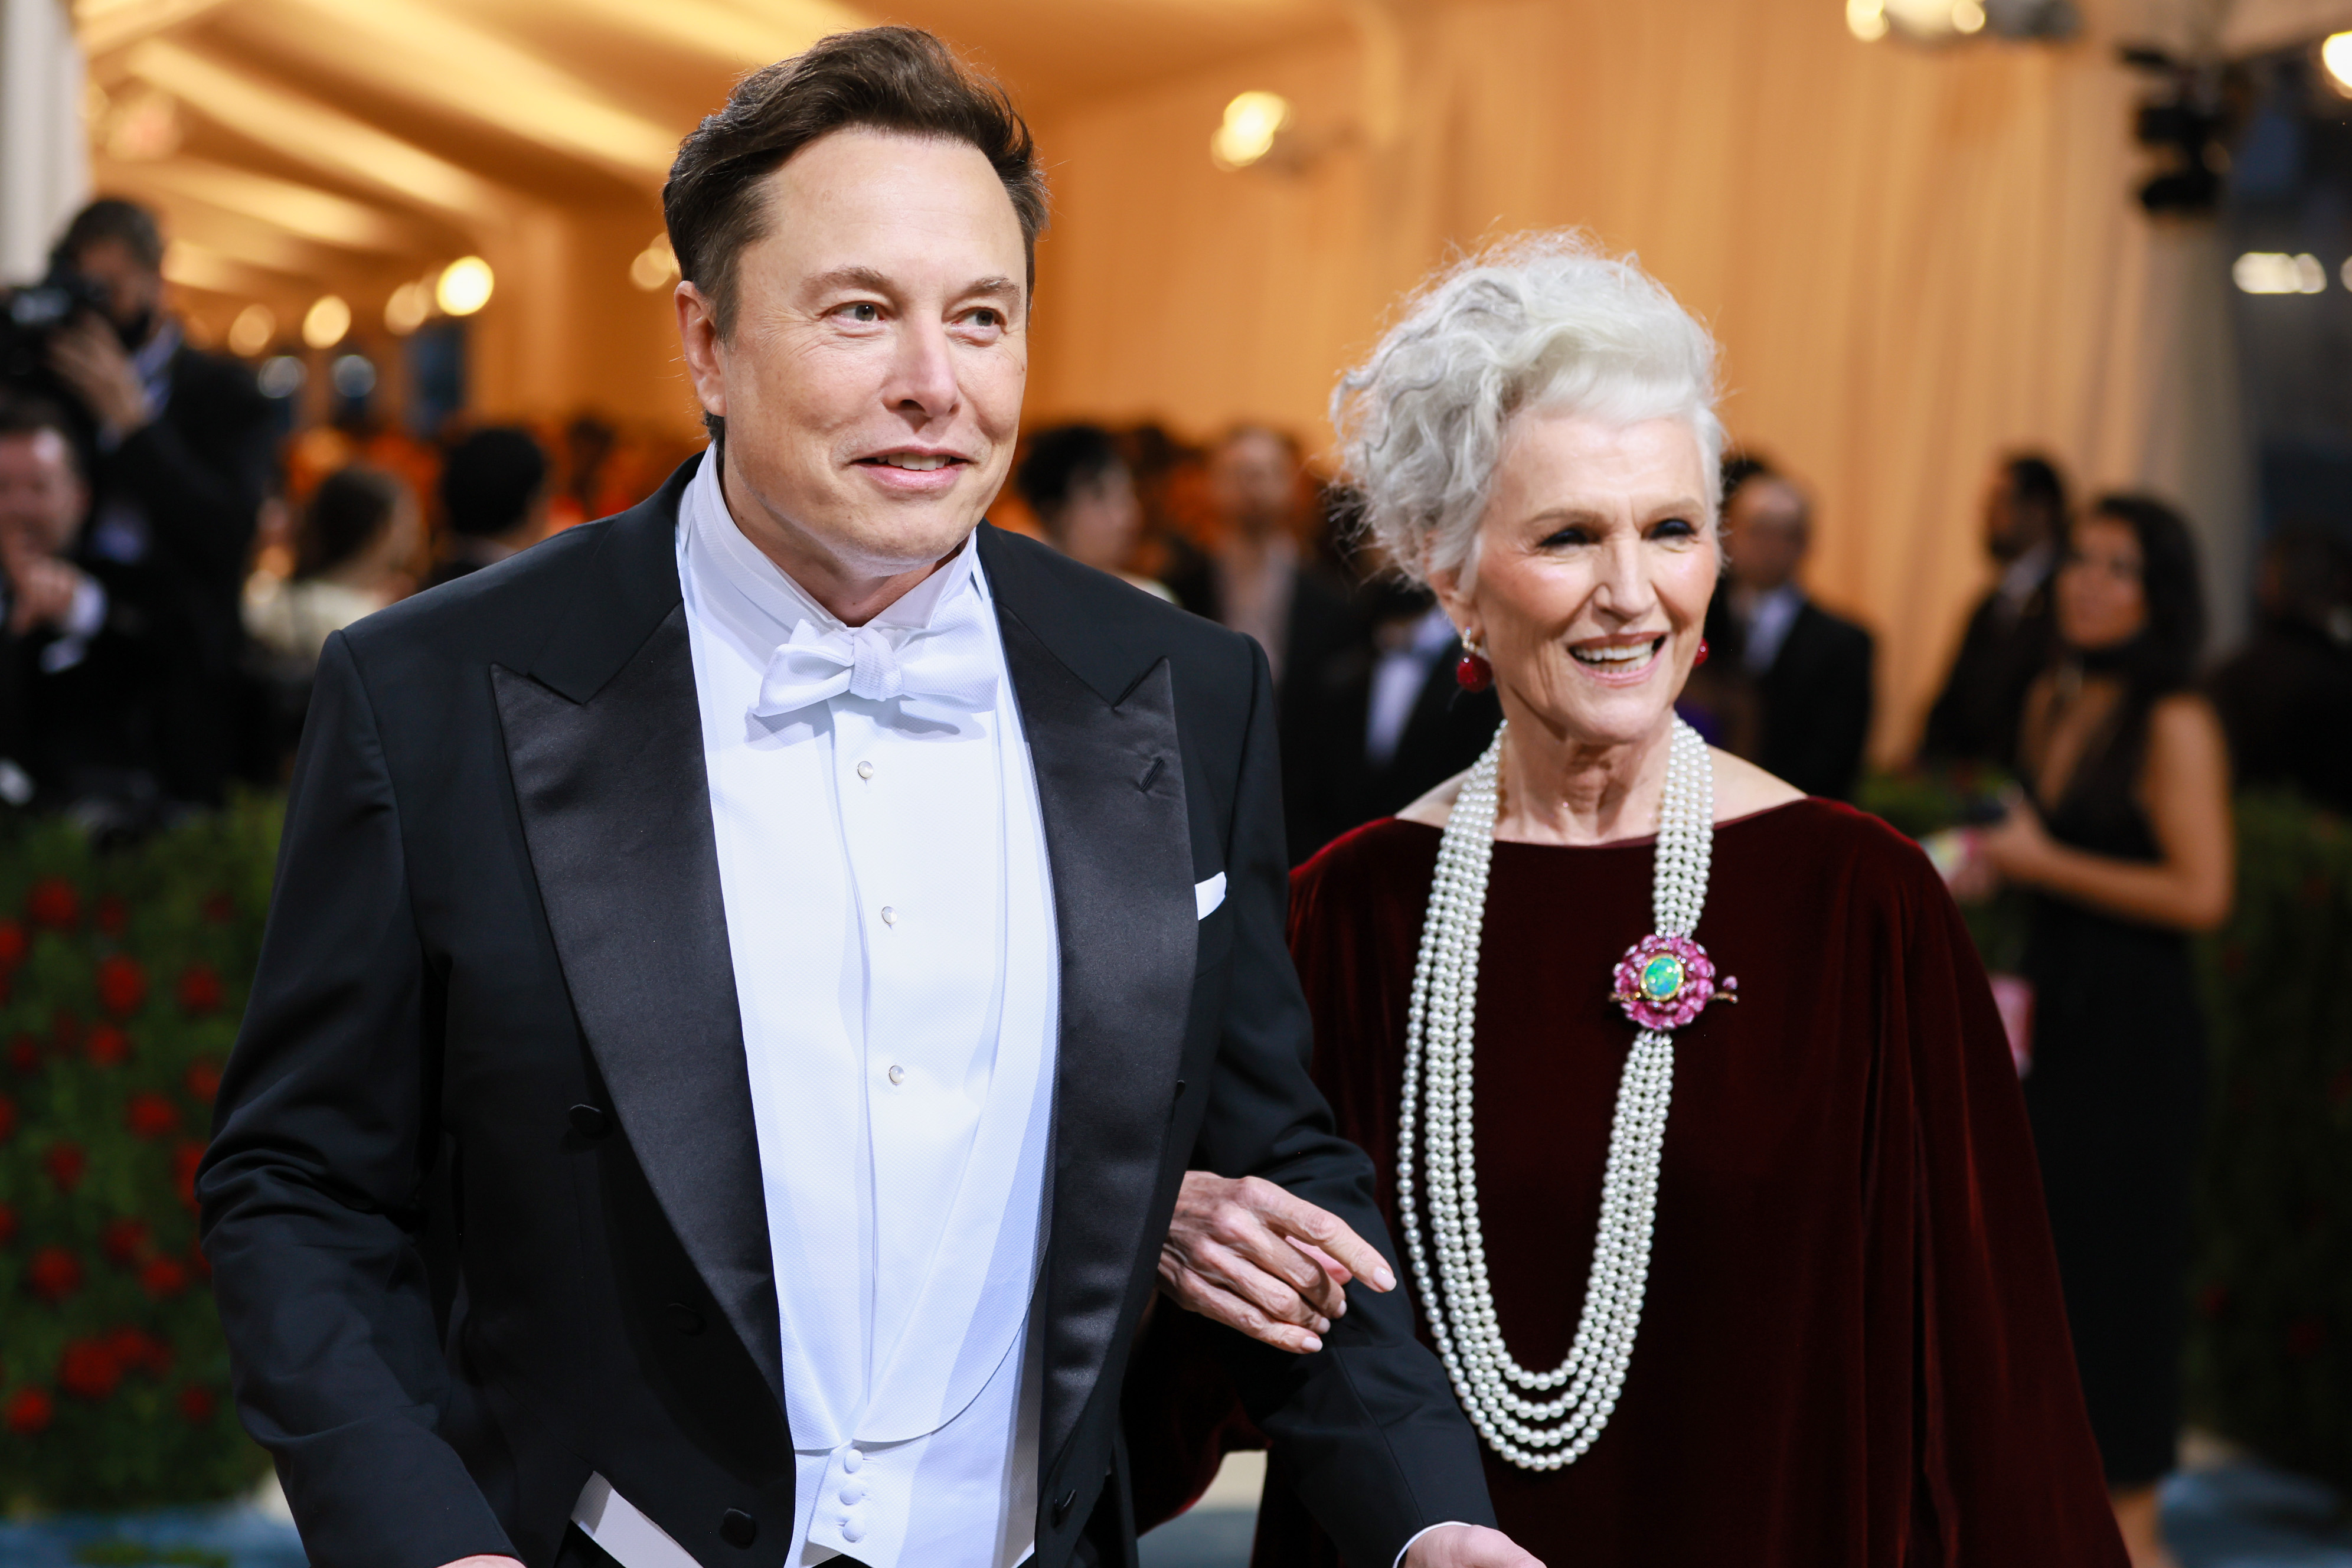 Elon Musk and his mother Maye Musk at the 2022 Met Gala. (Credit: Getty Images/	Theo Wargo)